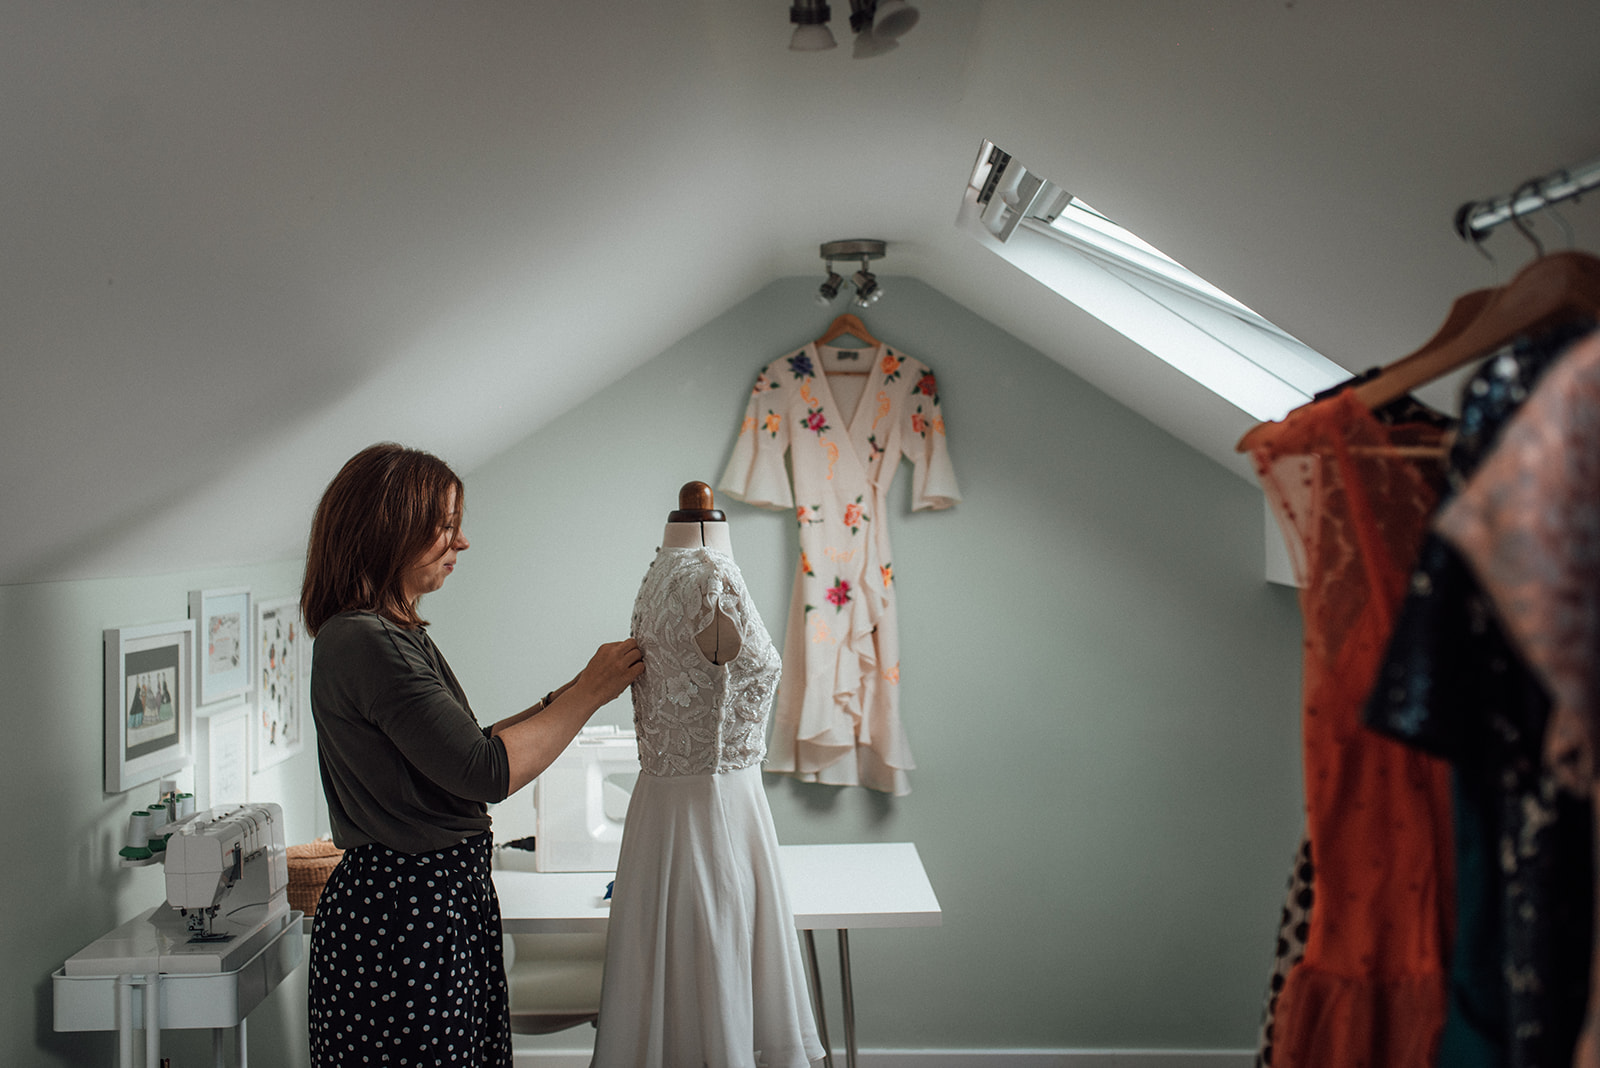 a seamstress in her home studio pinning a dress to make alterations